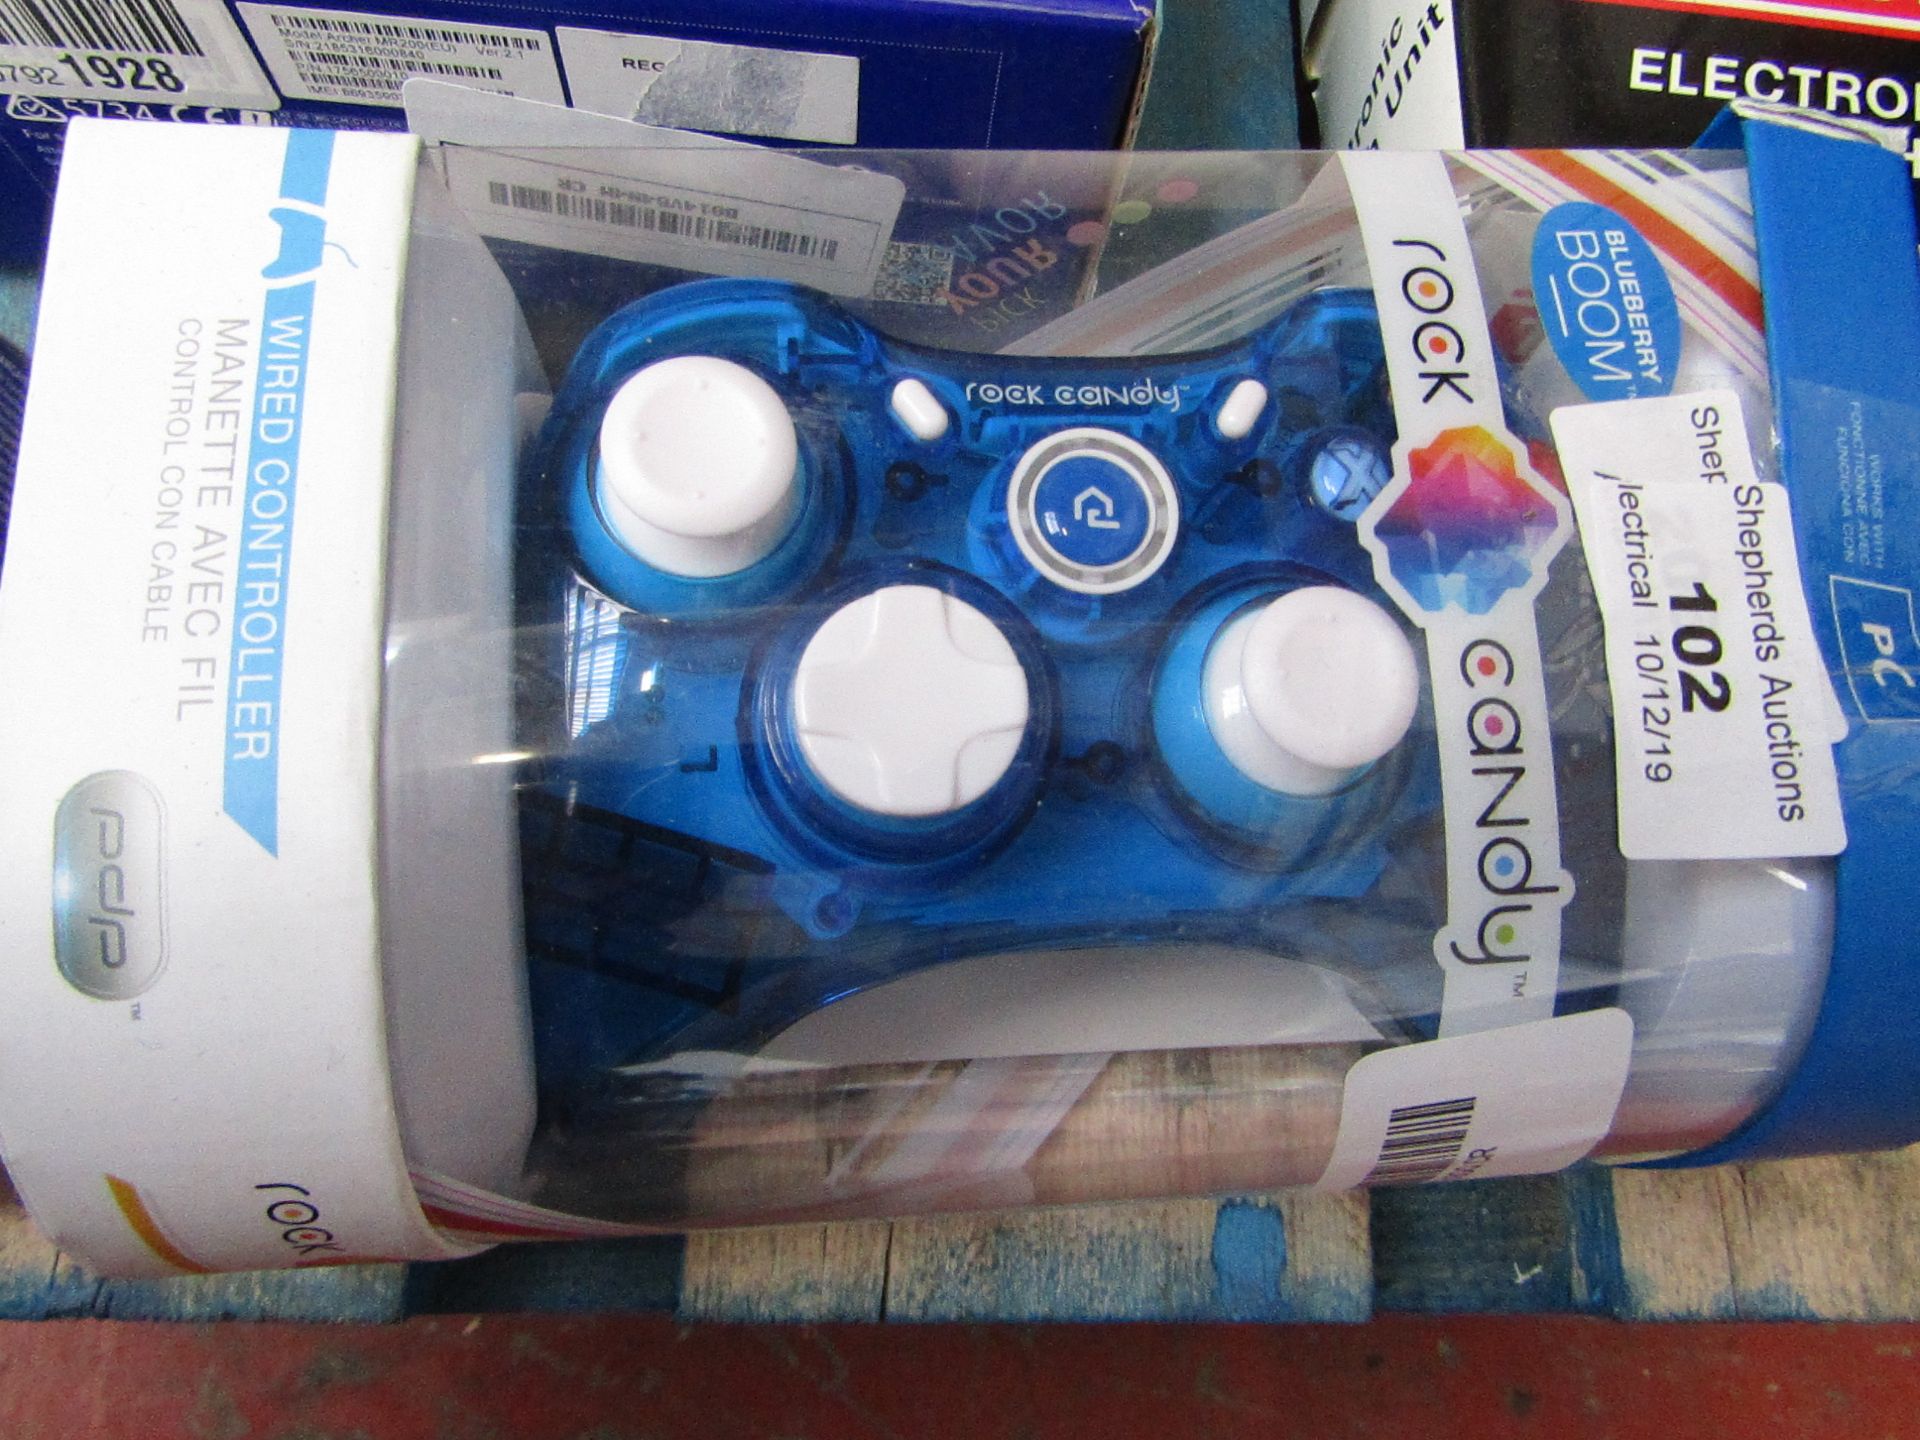 ROCK CANDY - Wired controller - Blueberry Boom, untested and packaged.